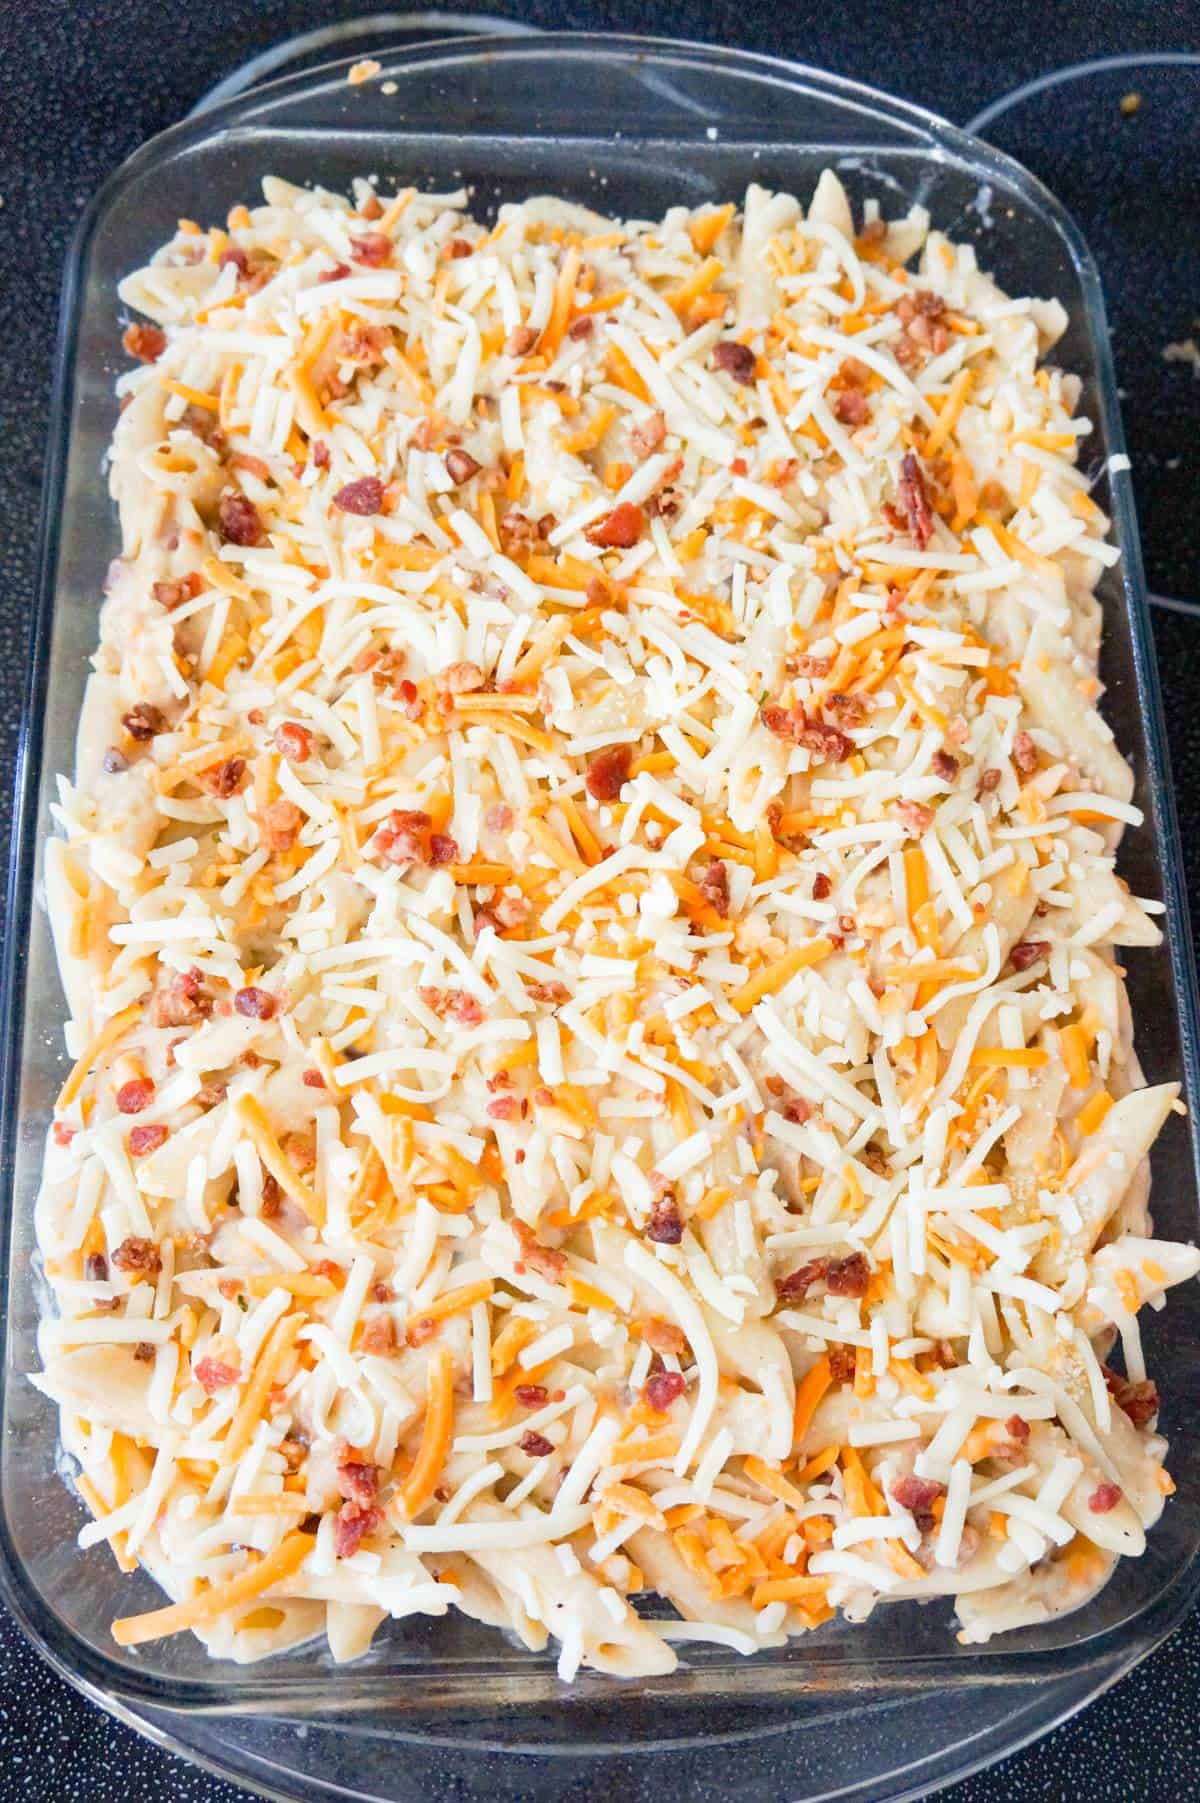 crumbled bacon and shredded cheddar on top of penne pasta in a baking dish